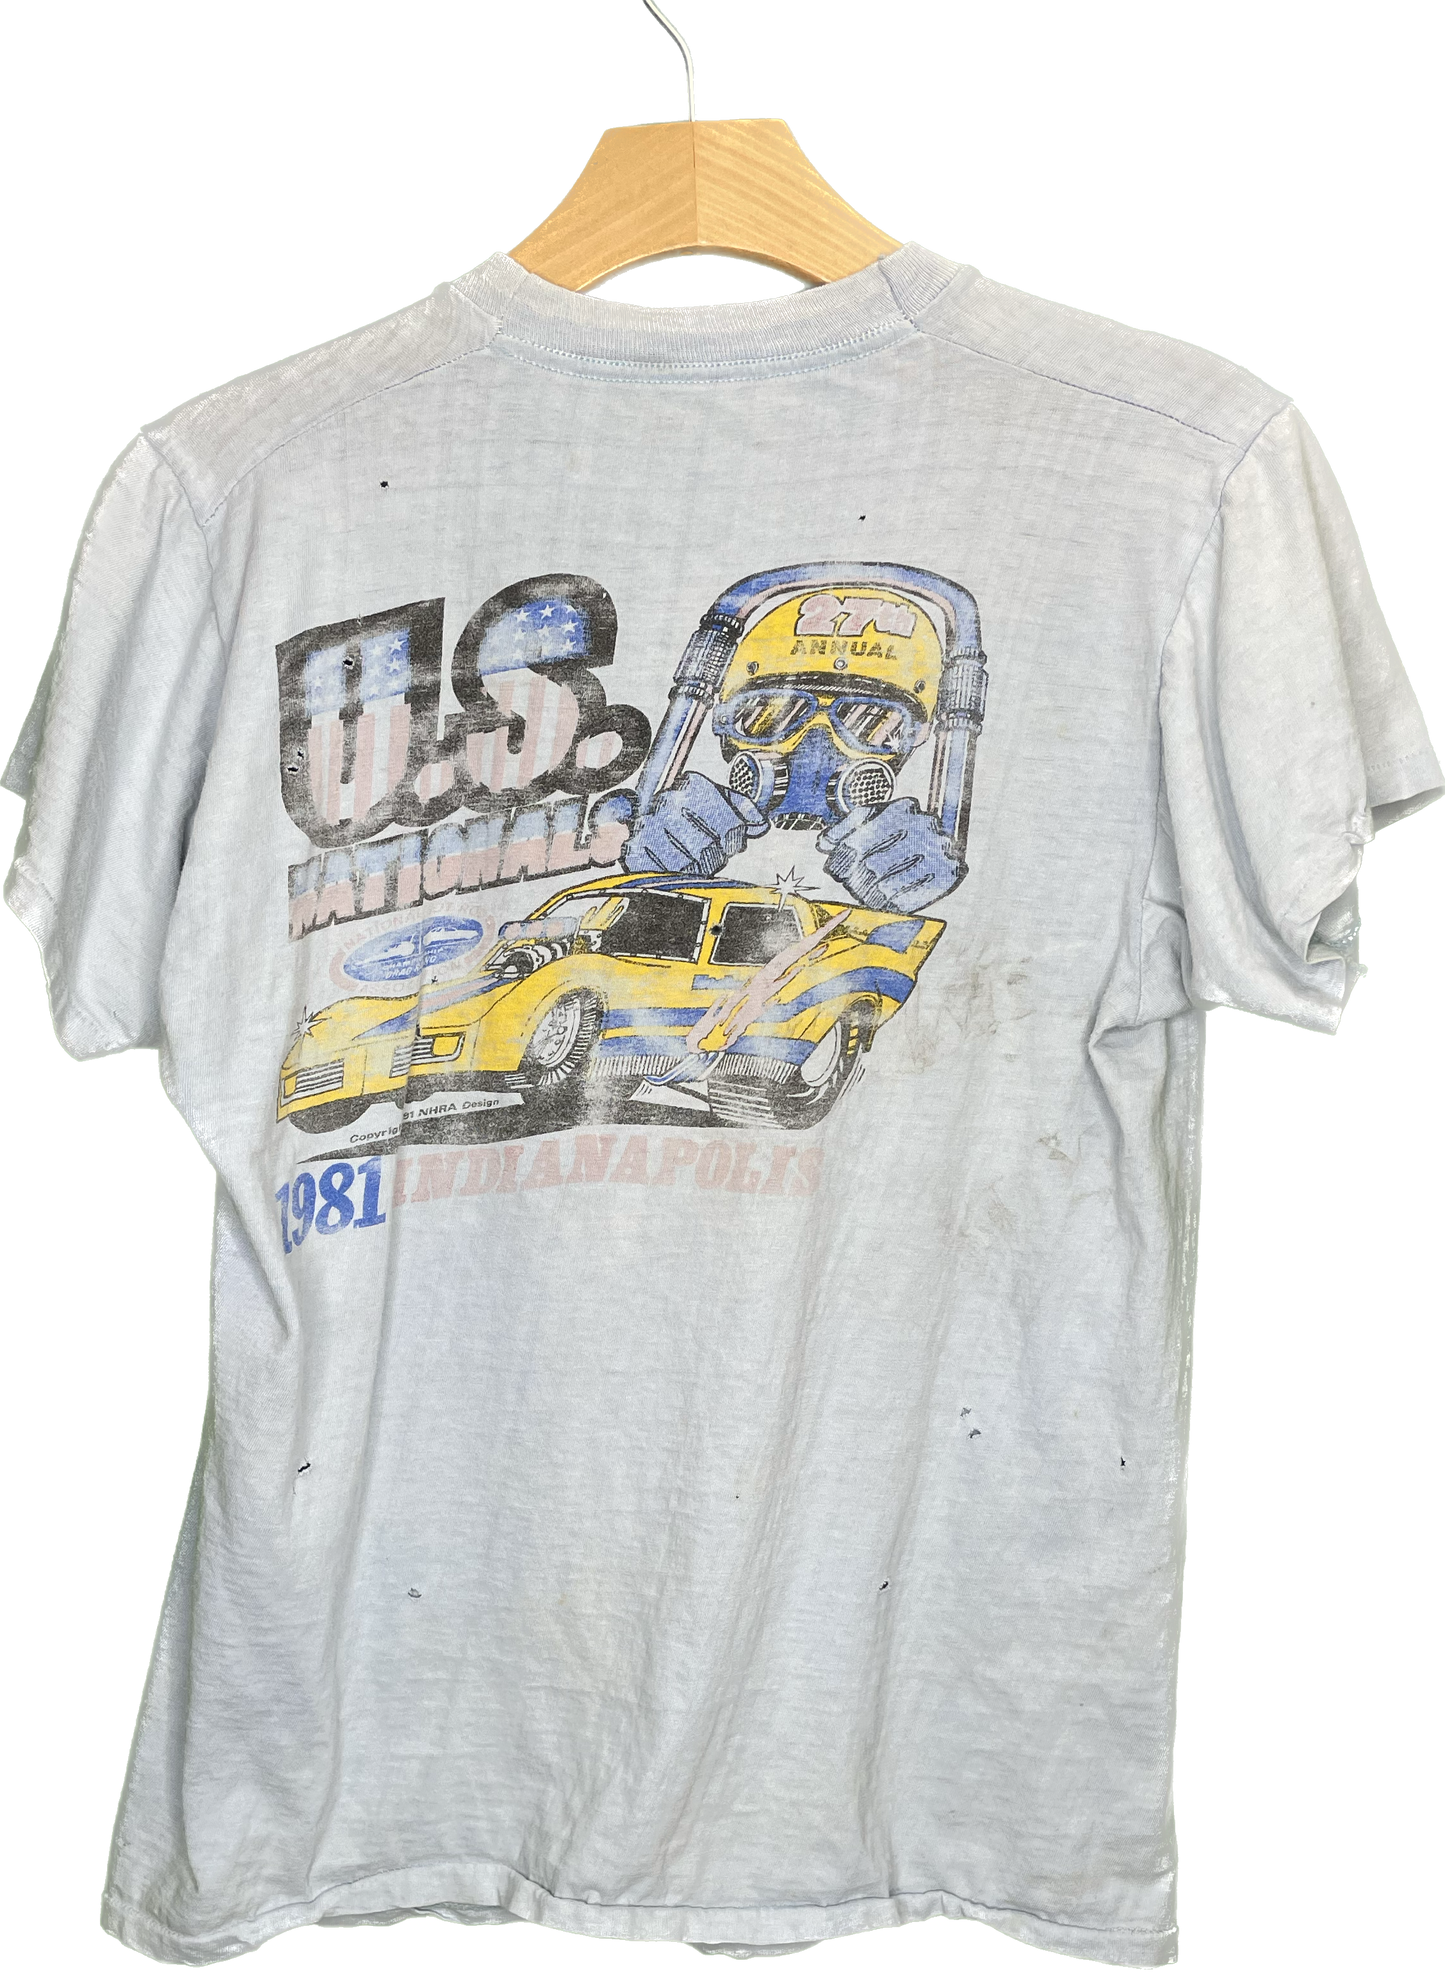 Vintage S/M 1980 US Nationals Drag Race Worn Thin T-Shirt